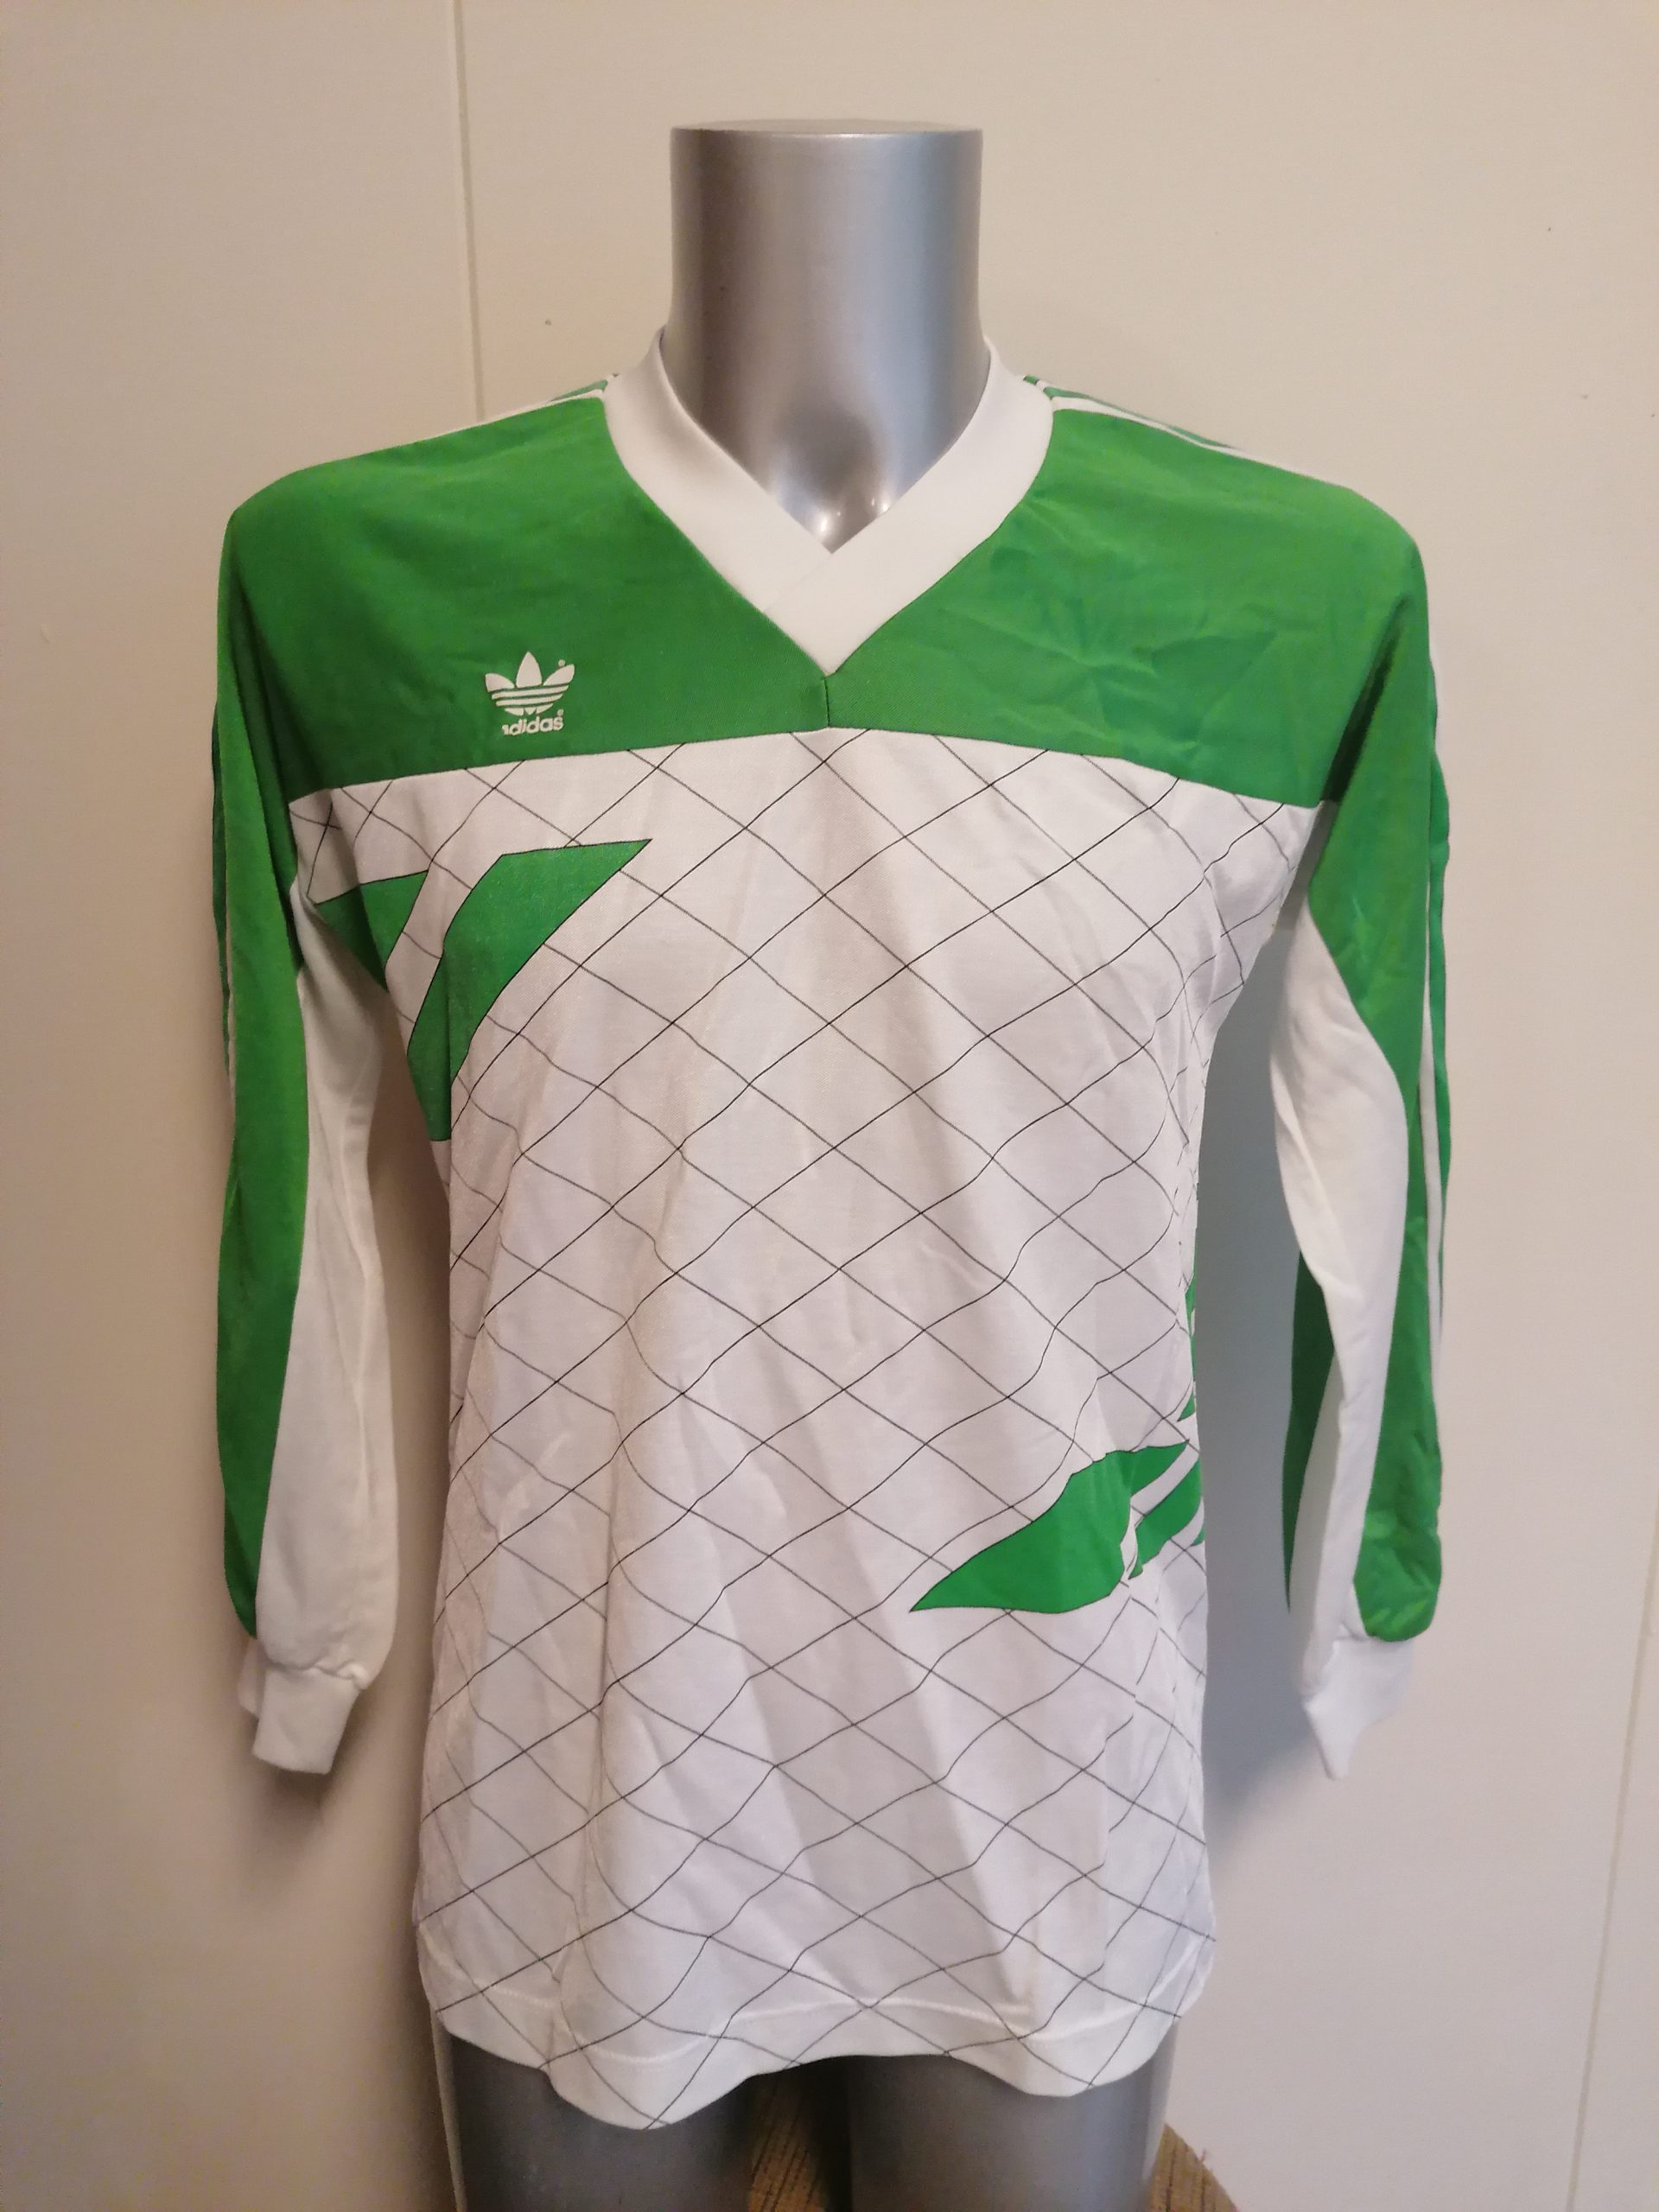 Vintage Adidas 1980ies l/s green shirt size M made in Yugoslavia